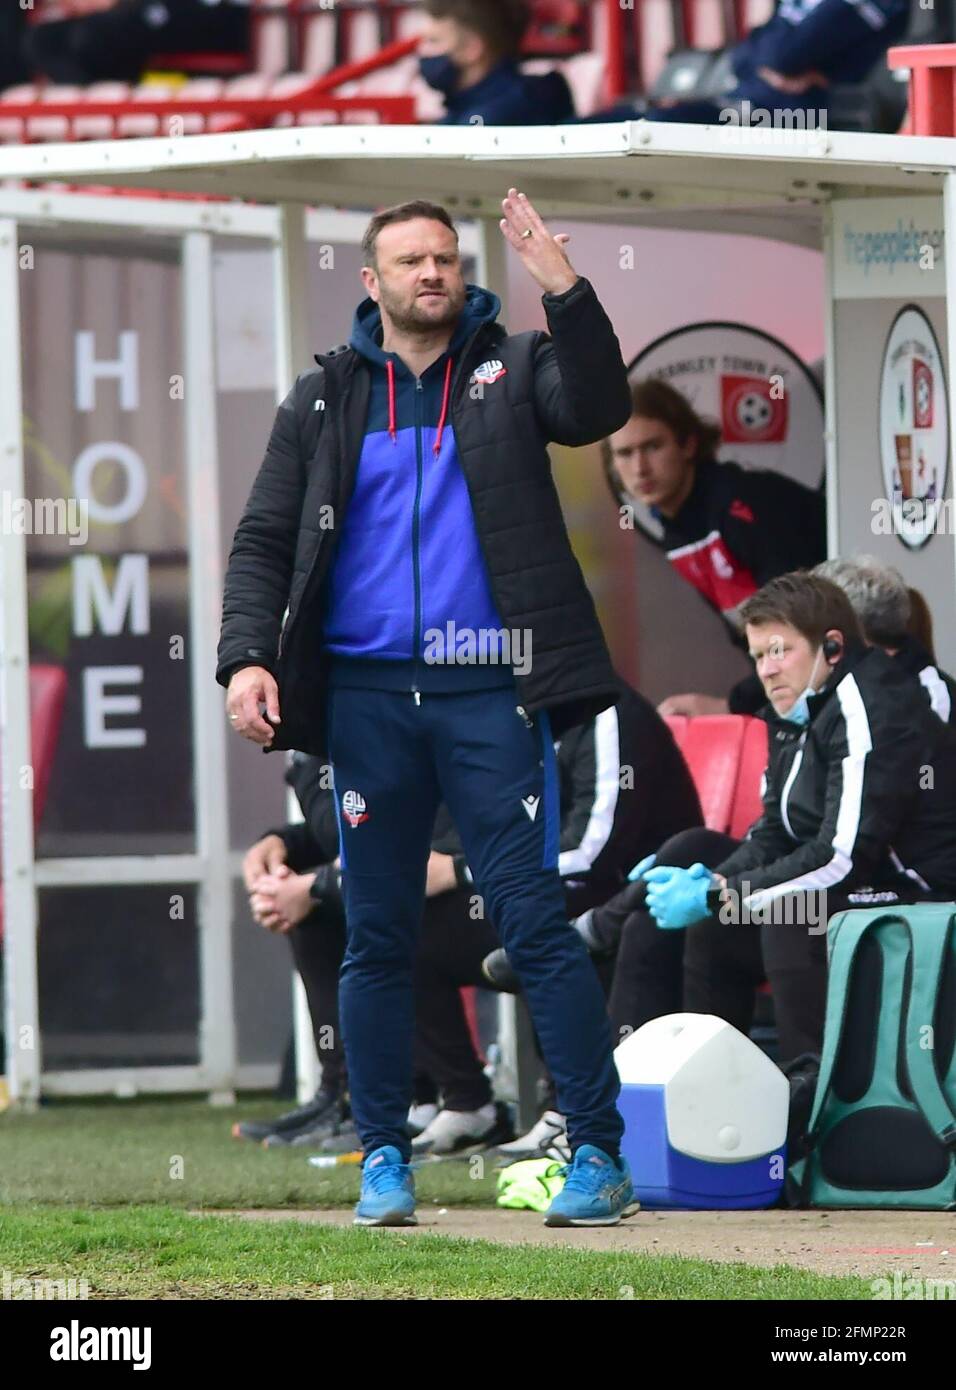 Bolton manager Ian Evatt holds up four fingers during the Sky Bet League Two match between Crawley Town and Bolton Wanderers at the People's Pension Stadium  , Crawley ,  UK - 8th May 2021 -  EDITORIAL USE ONLY No use with unauthorised audio, video, data, fixture lists, club/league logos or “live” services. Online in-match use limited to 120 images, no video emulation. No use in betting, games or single club/league/player publications Stock Photo